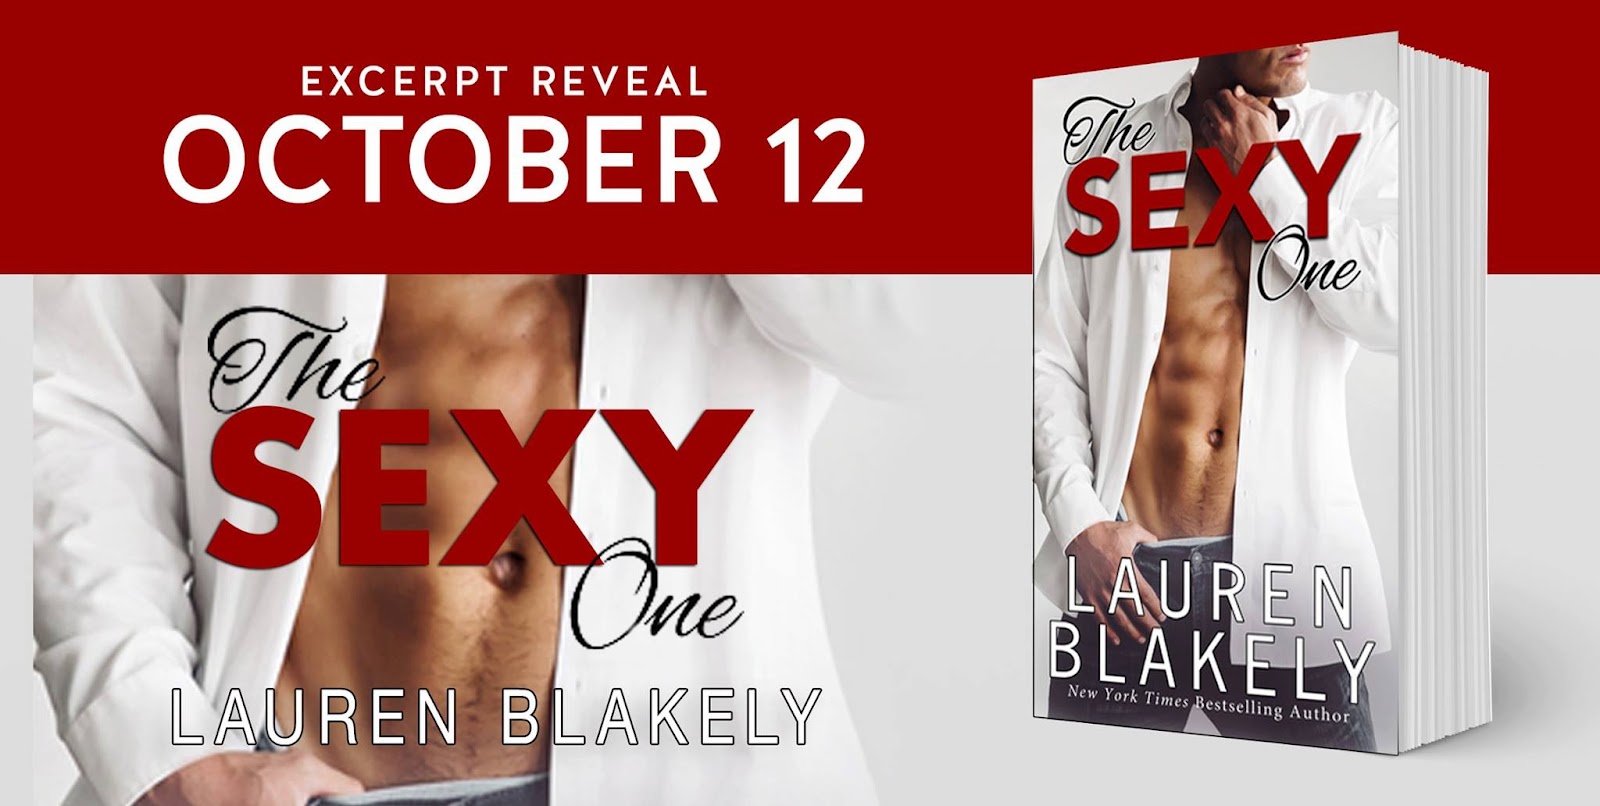 The sexy one excerpt reveal.jpg